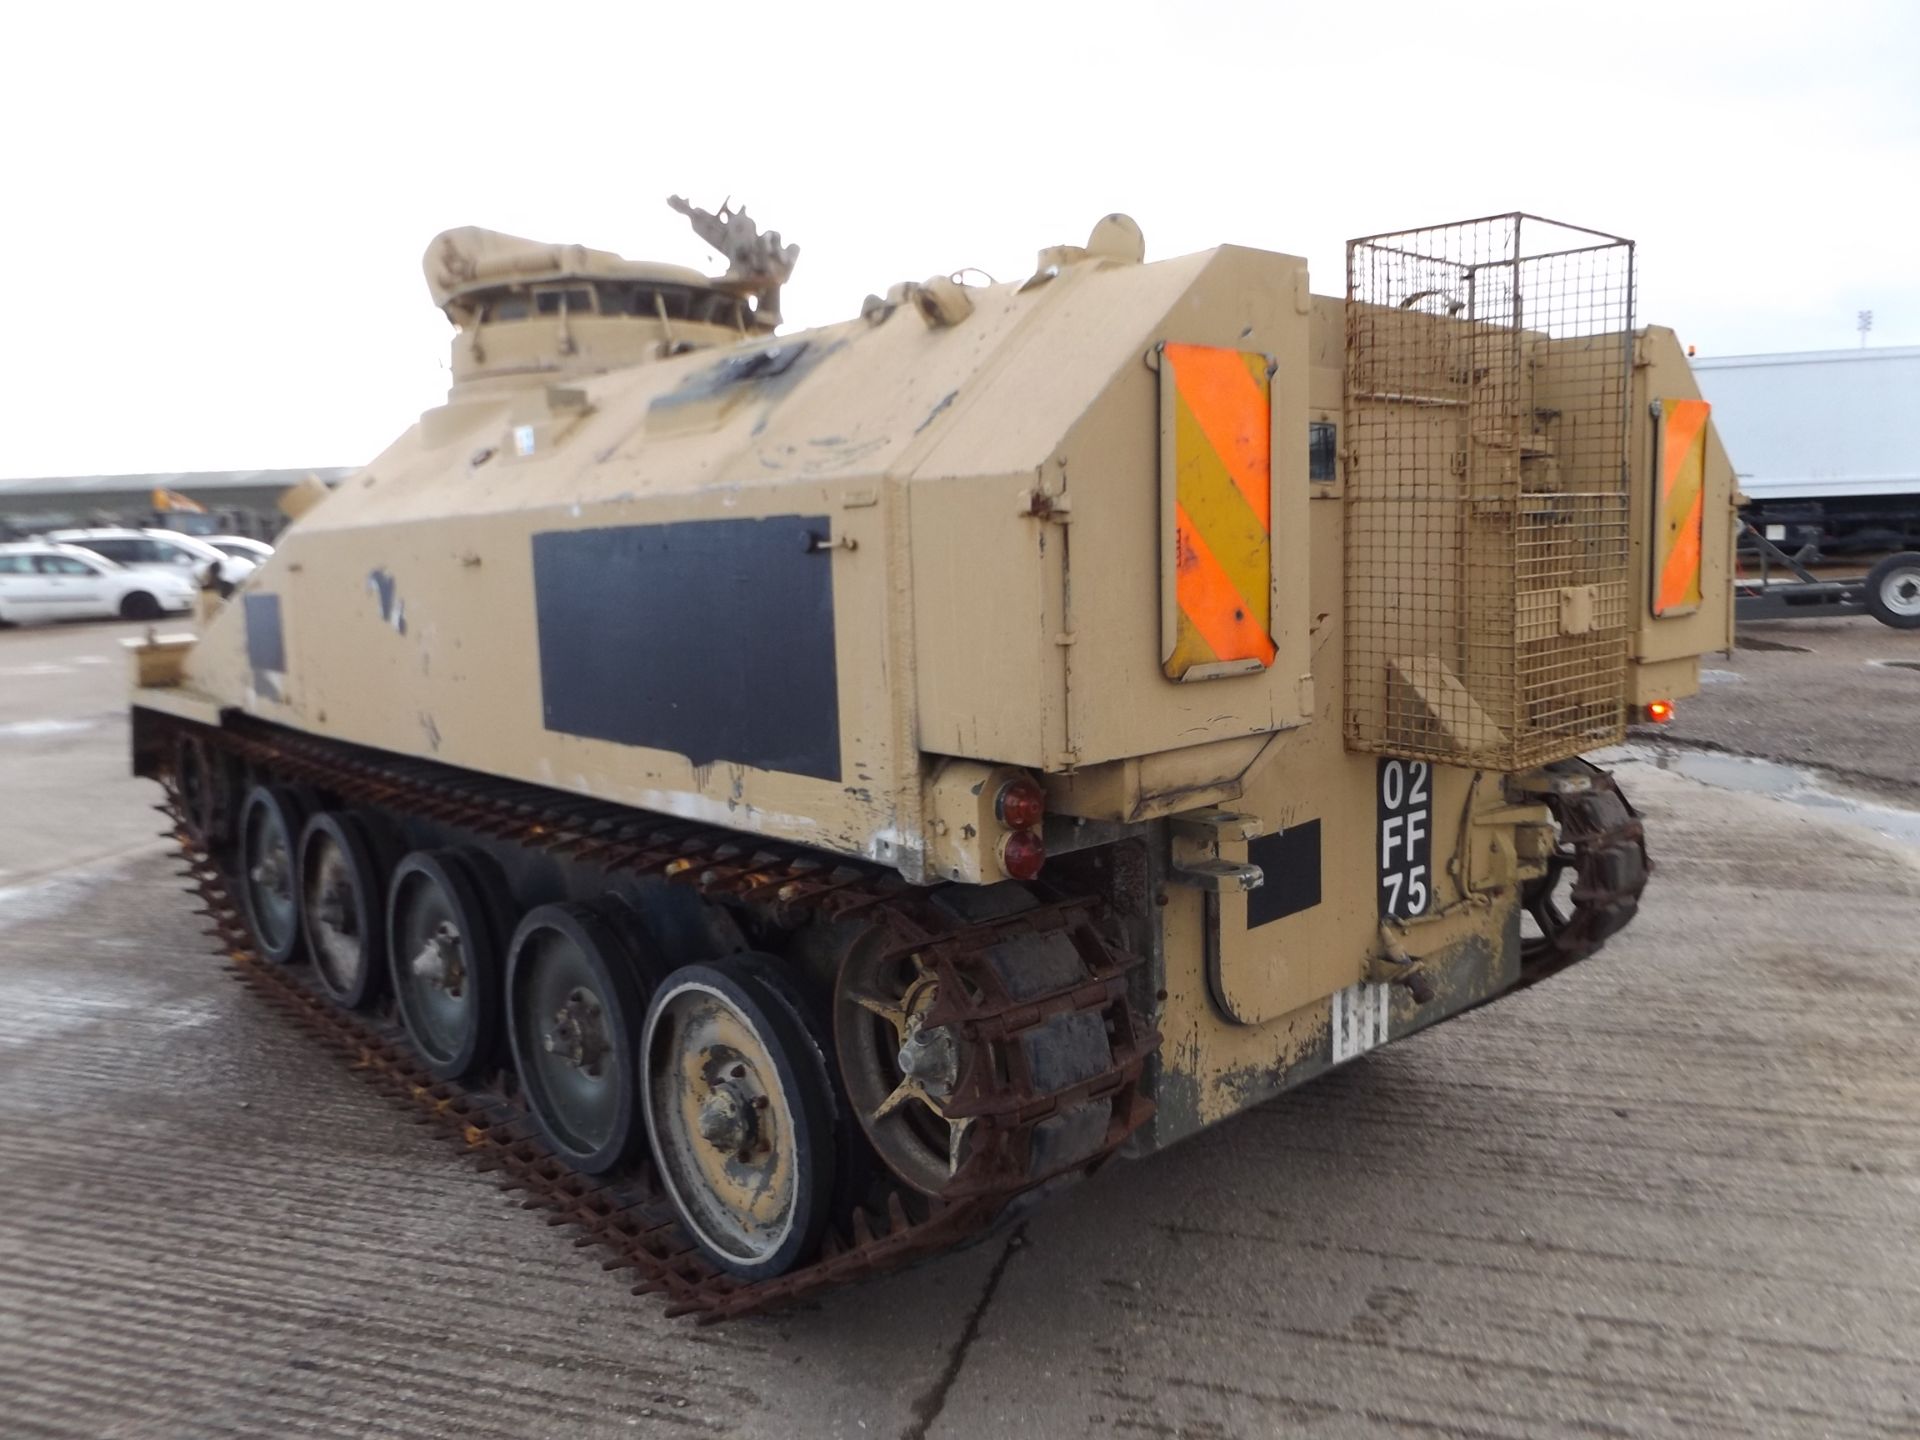 Dieselised CVRT (Combat Vehicle Reconnaissance Tracked) Spartan Armoured Personnel Carrier - Image 6 of 21